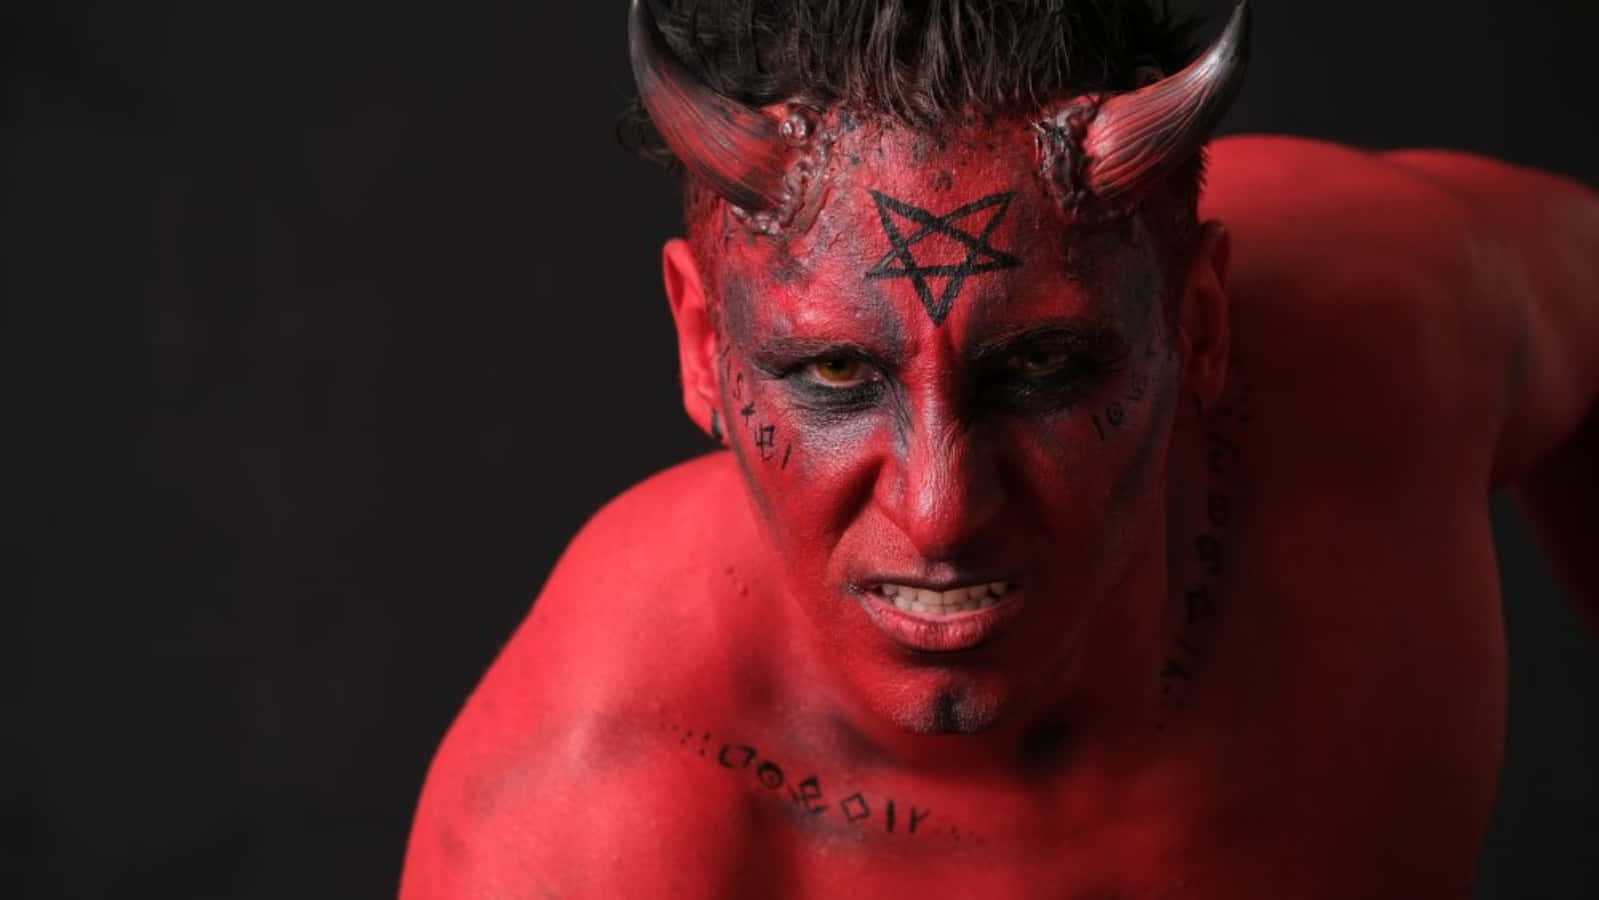 A Man With Red Devil Makeup On His Face